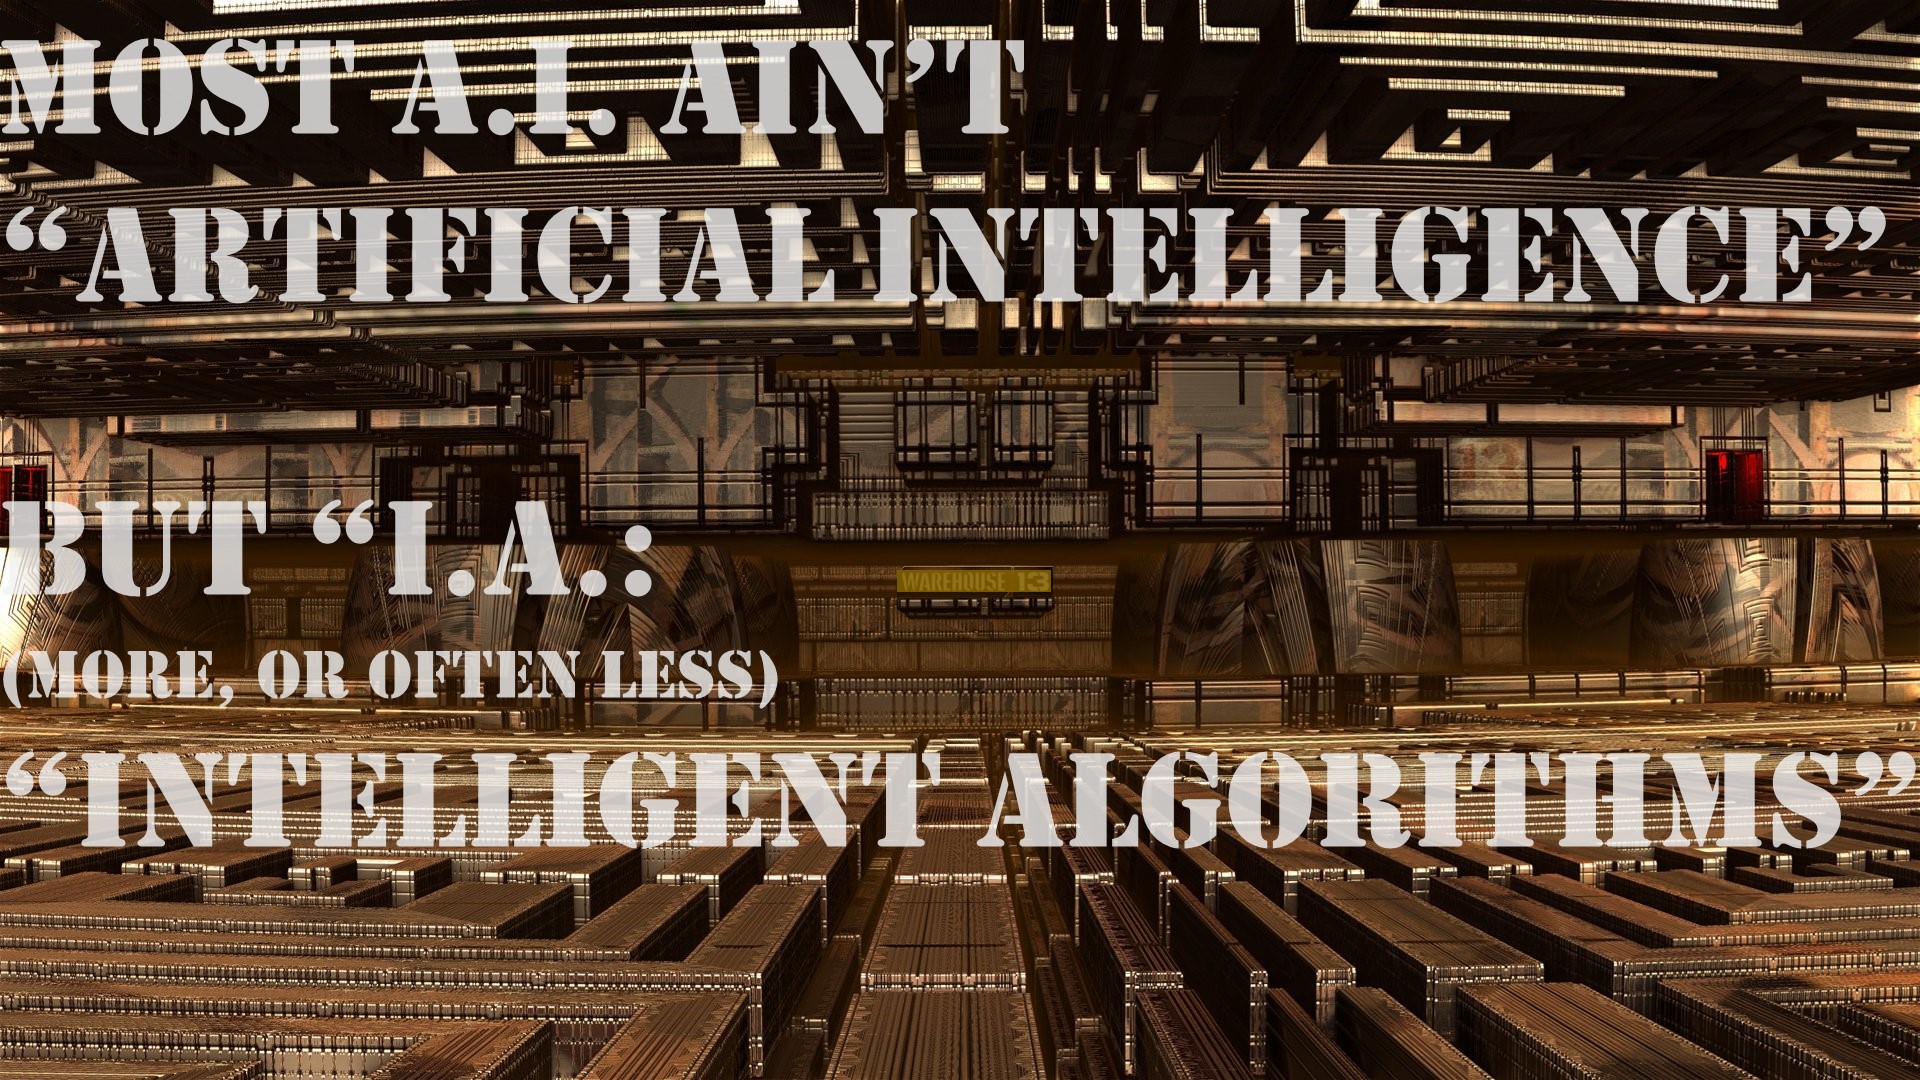 Most A.I. ain't Artificial Intelligence, but I.A.: (more, or often less) Intelligent Algorithms